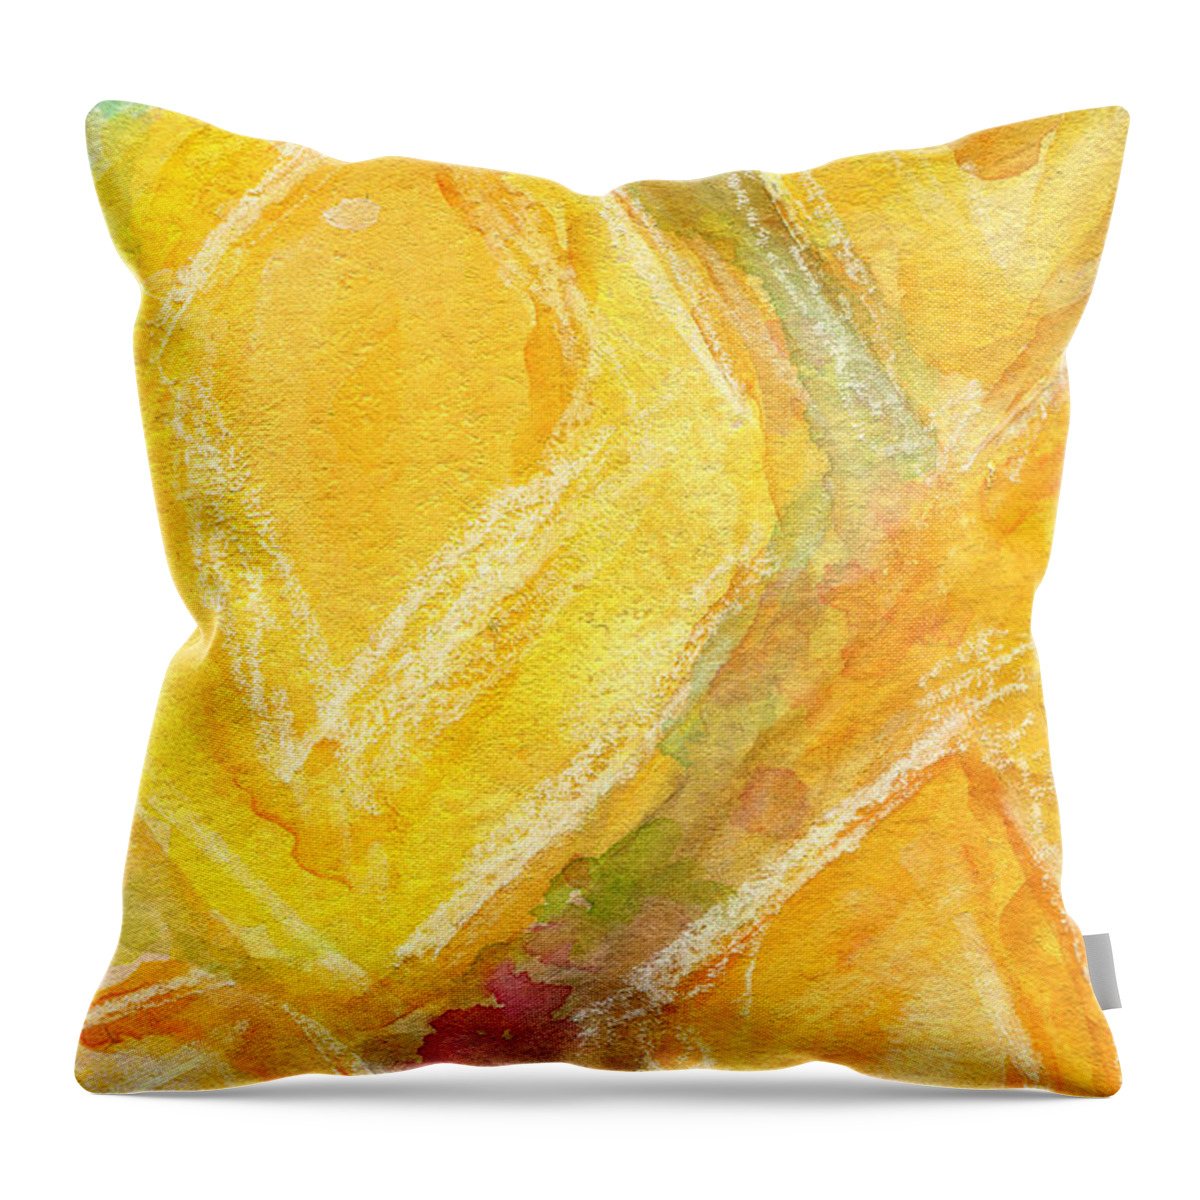 Abstract Painting Throw Pillow featuring the painting Lemon Drops by Linda Woods